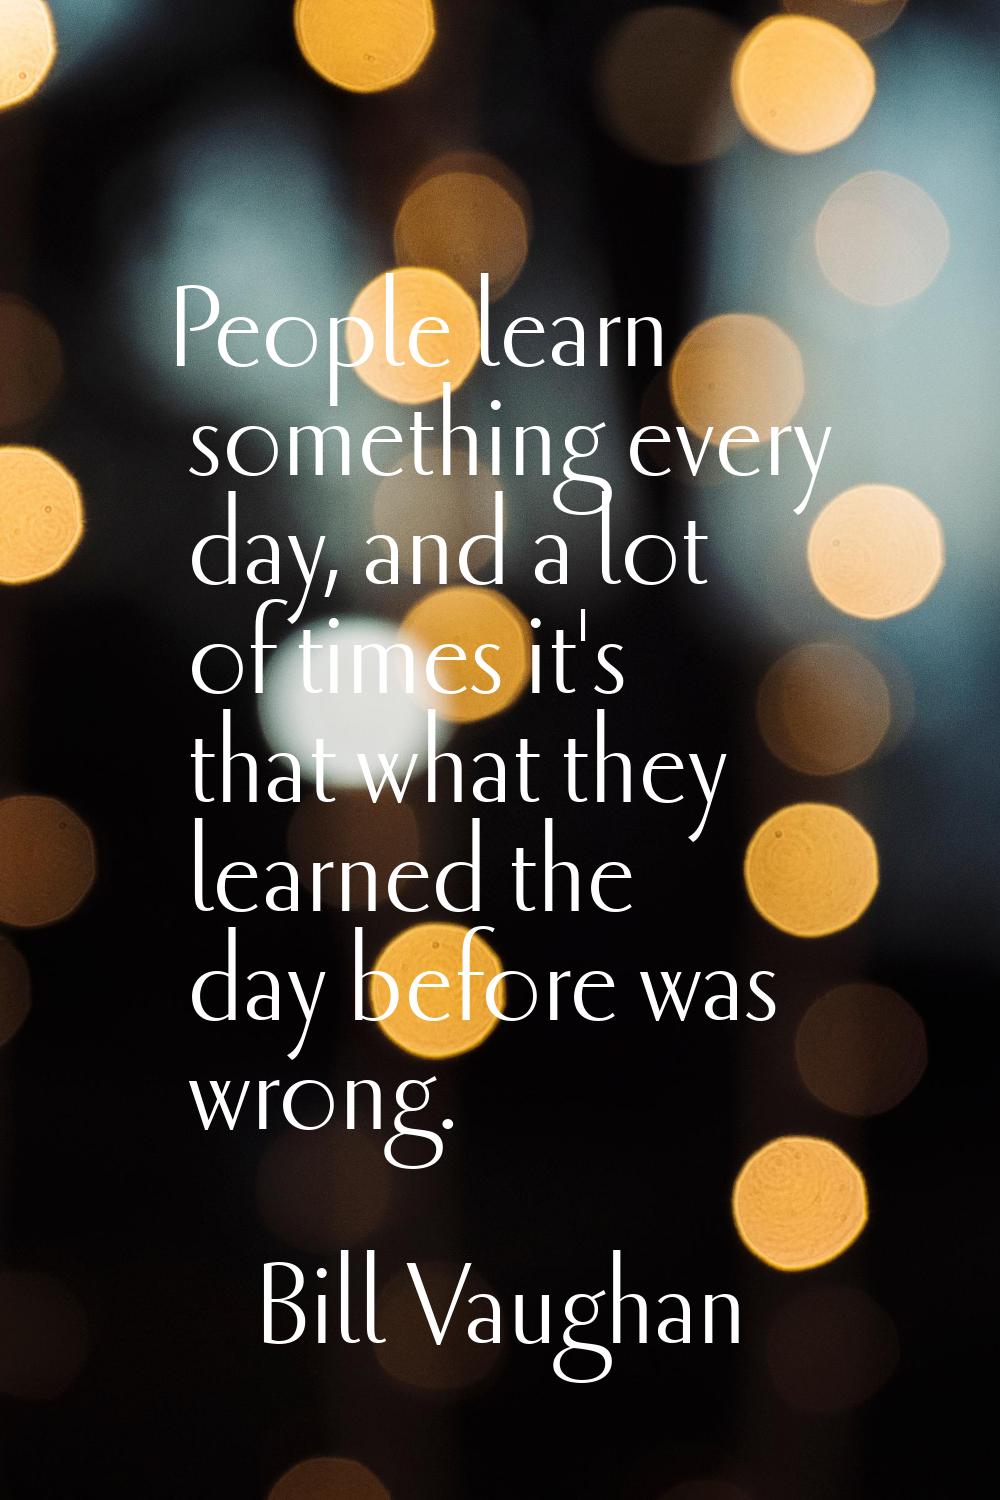 People learn something every day, and a lot of times it's that what they learned the day before was